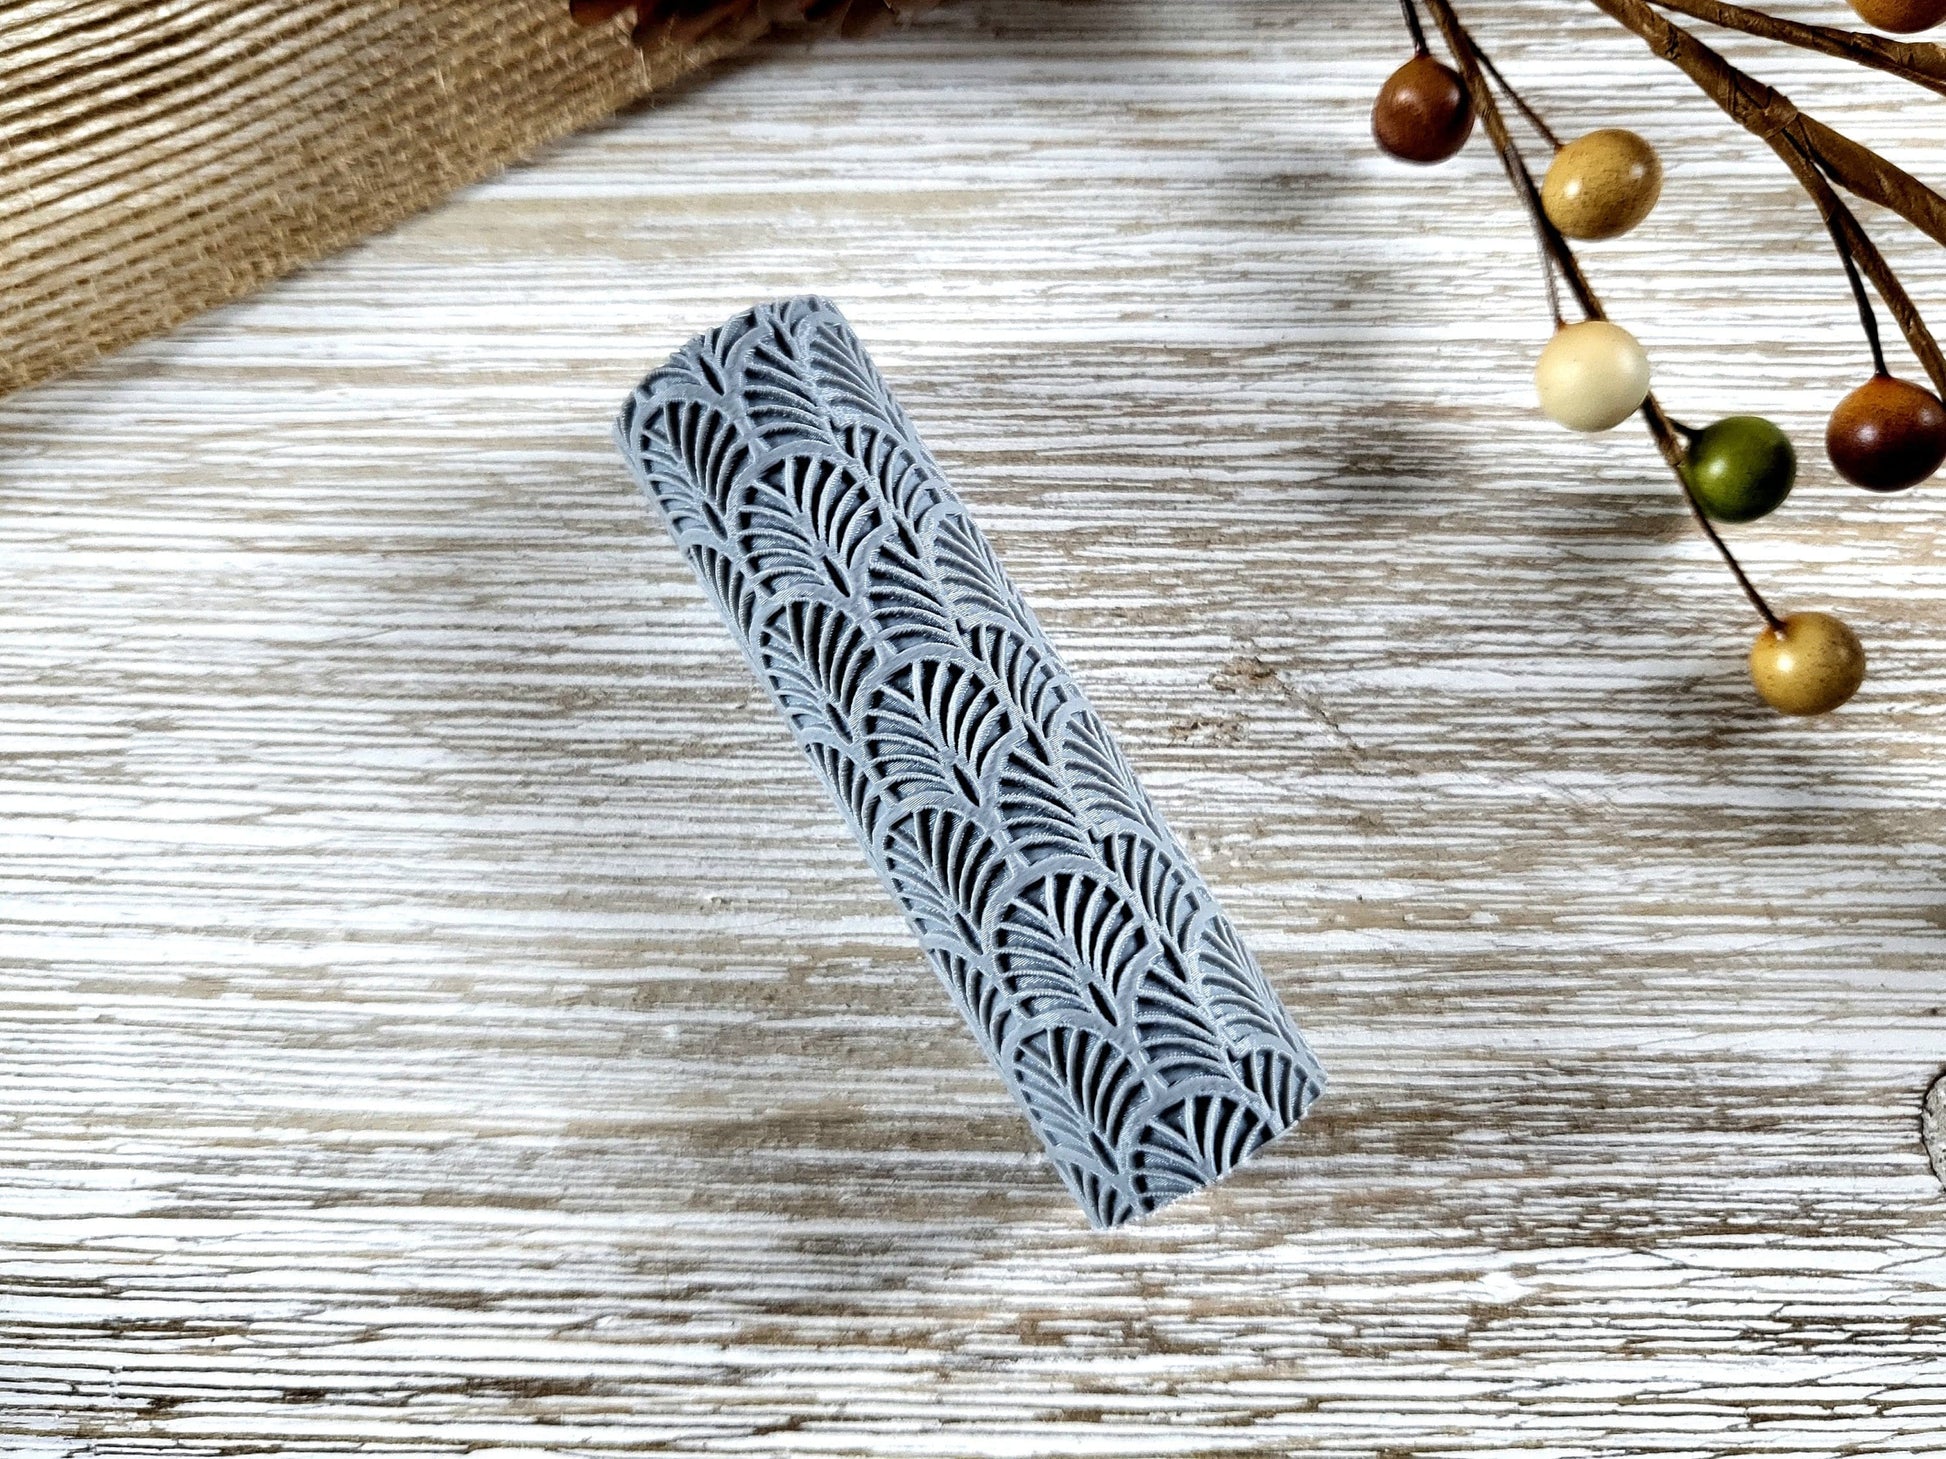 Art Deco Clay Texture Roller – Olive the Stuff